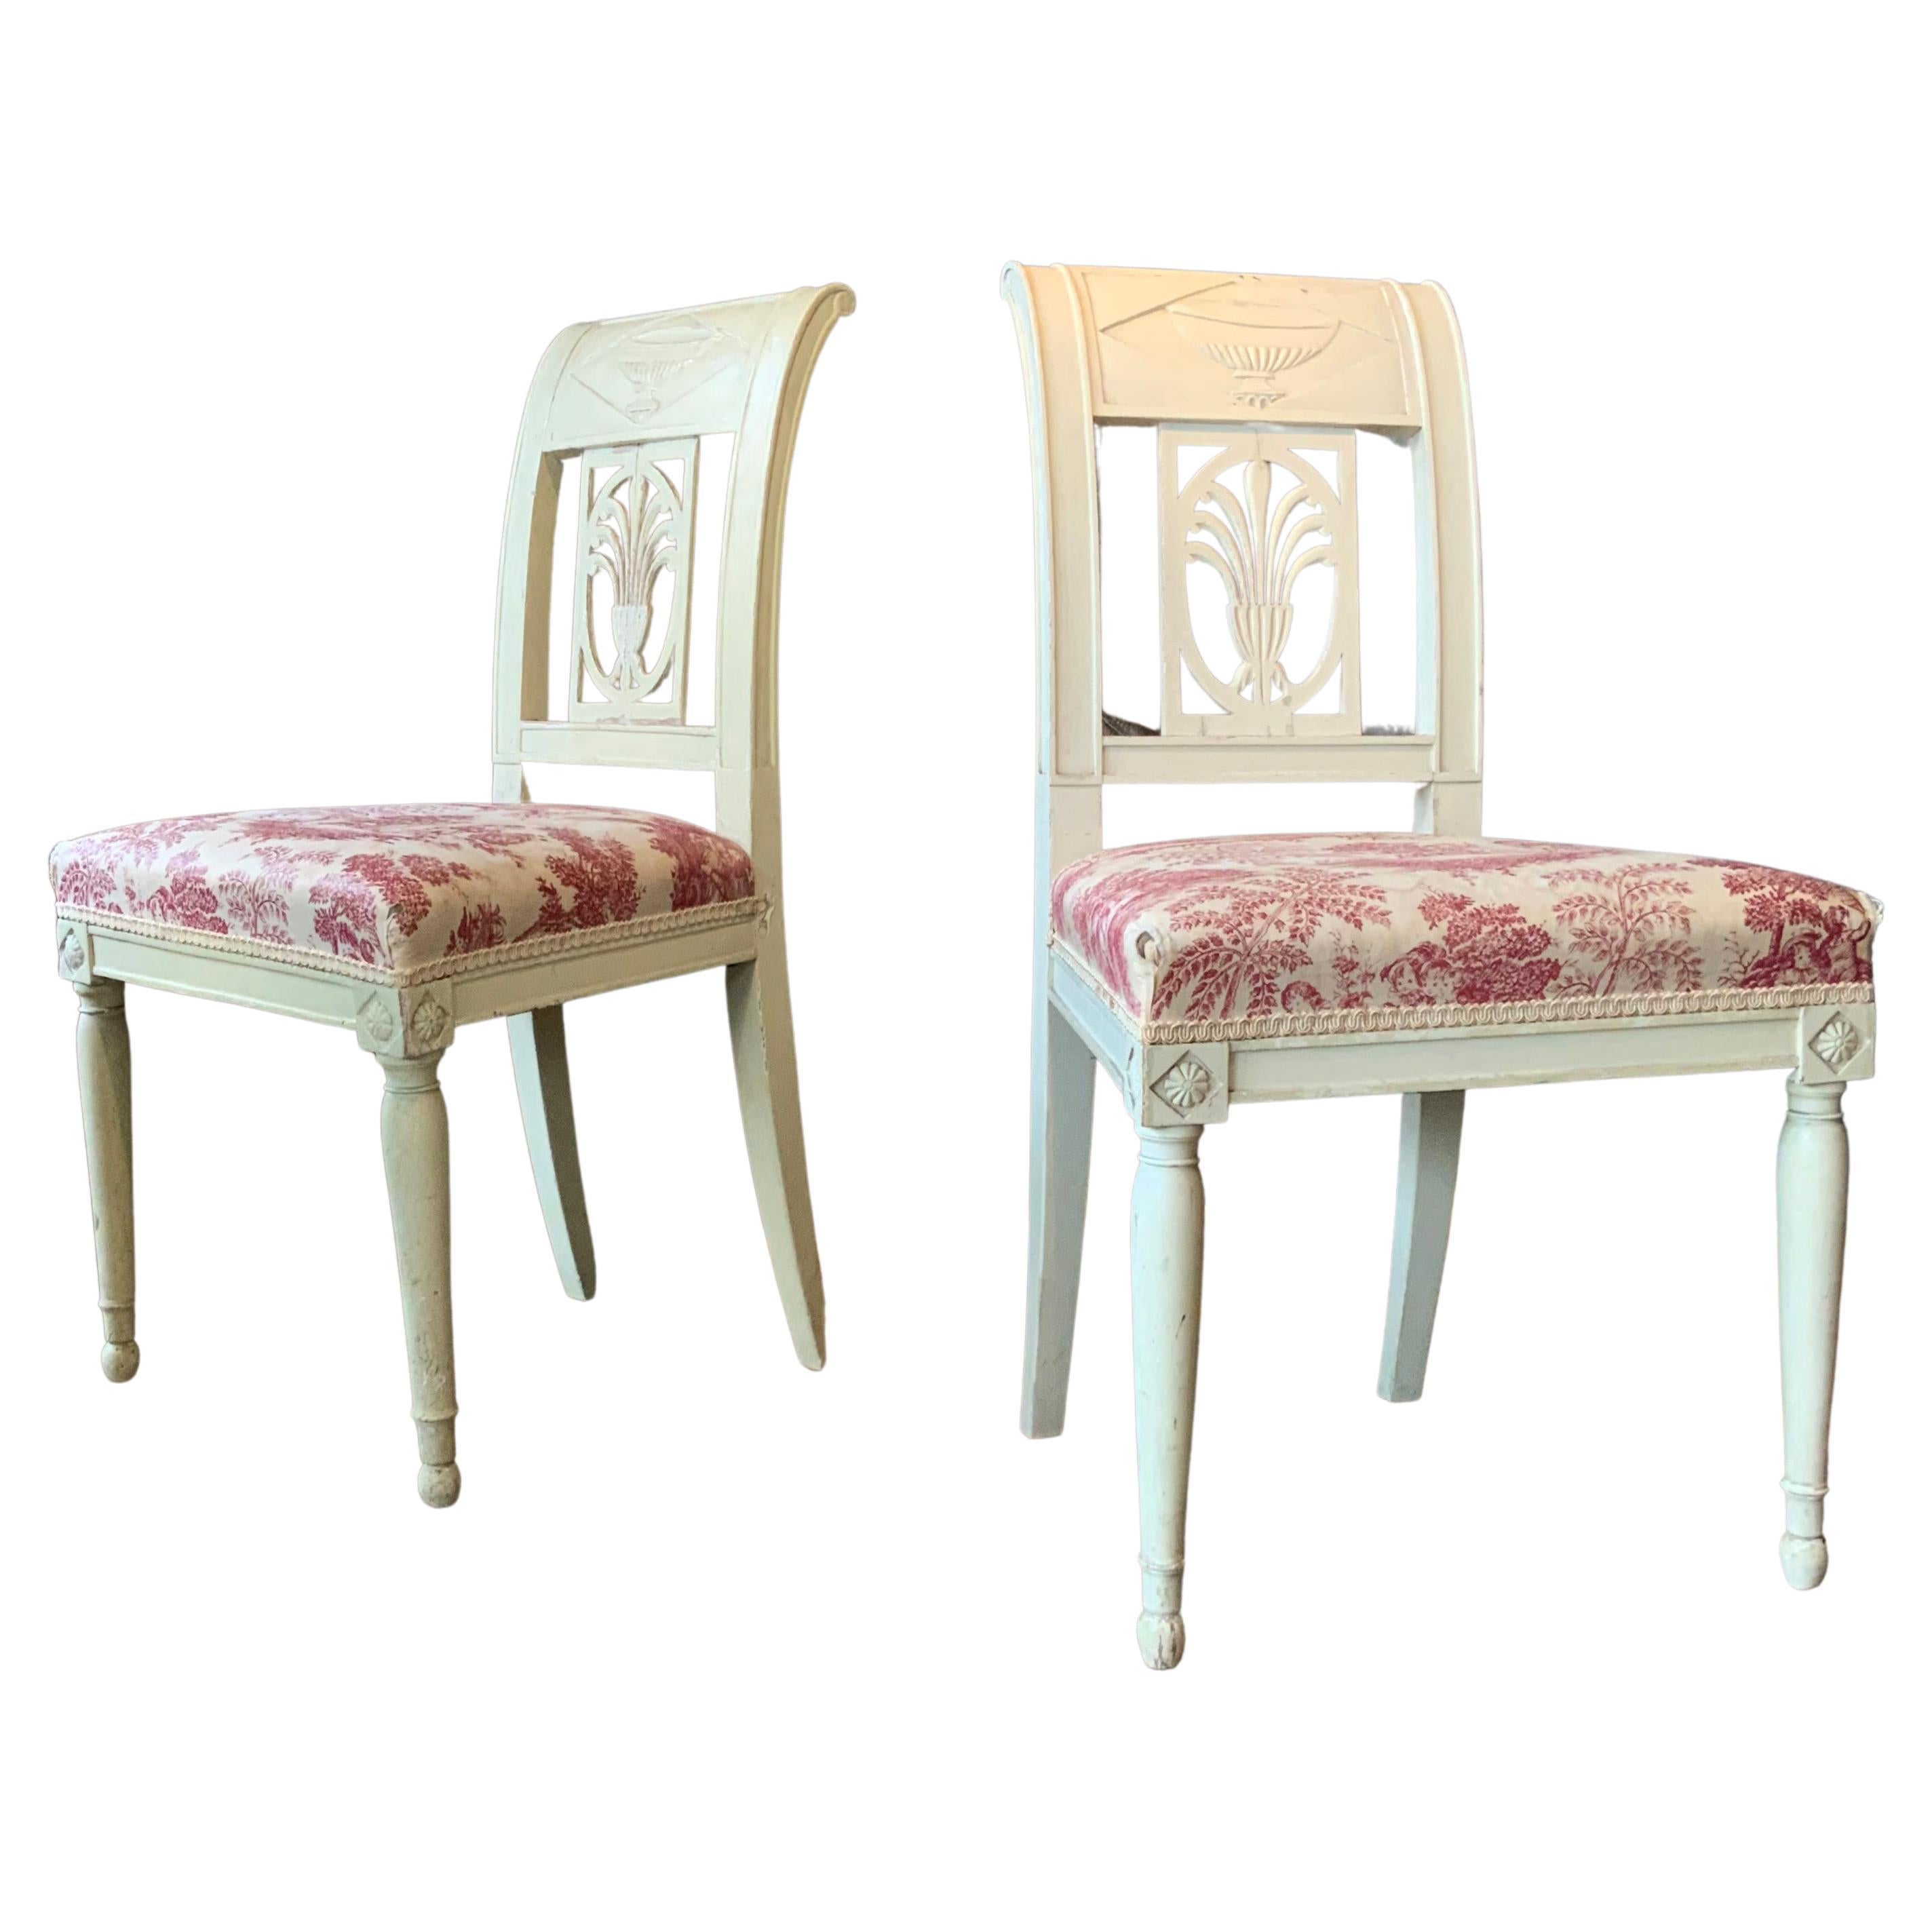 Pair of 19th Century Chairs from a Newport RI Estate by Ogden Codman